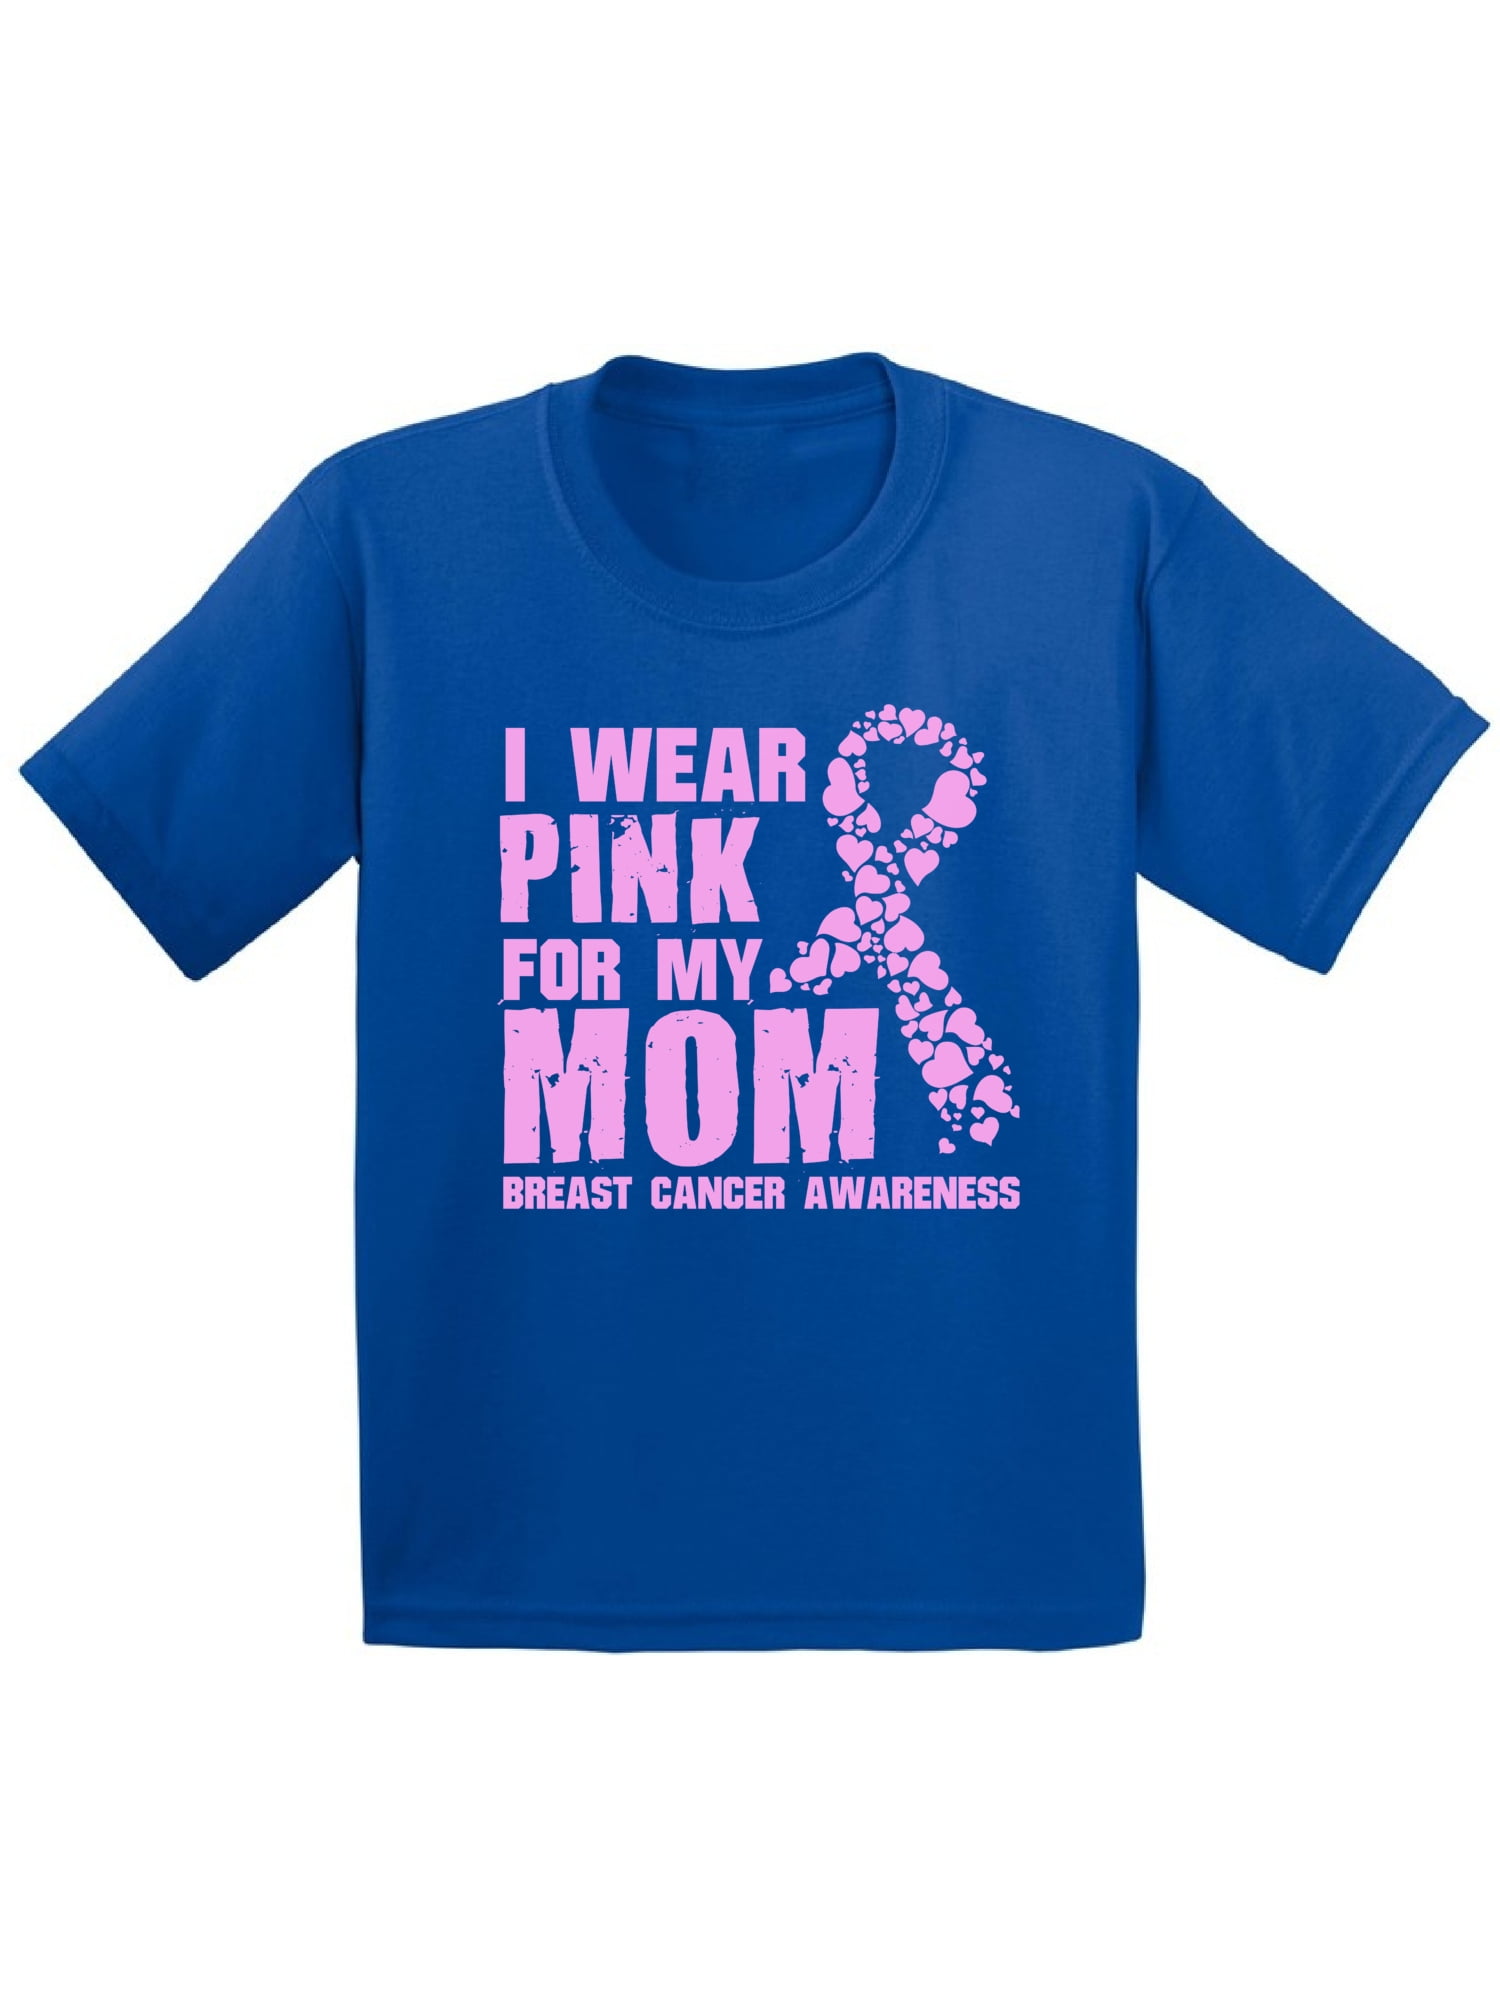 K Cancer Boston Red Sox Shirt - Jolly Family Gifts